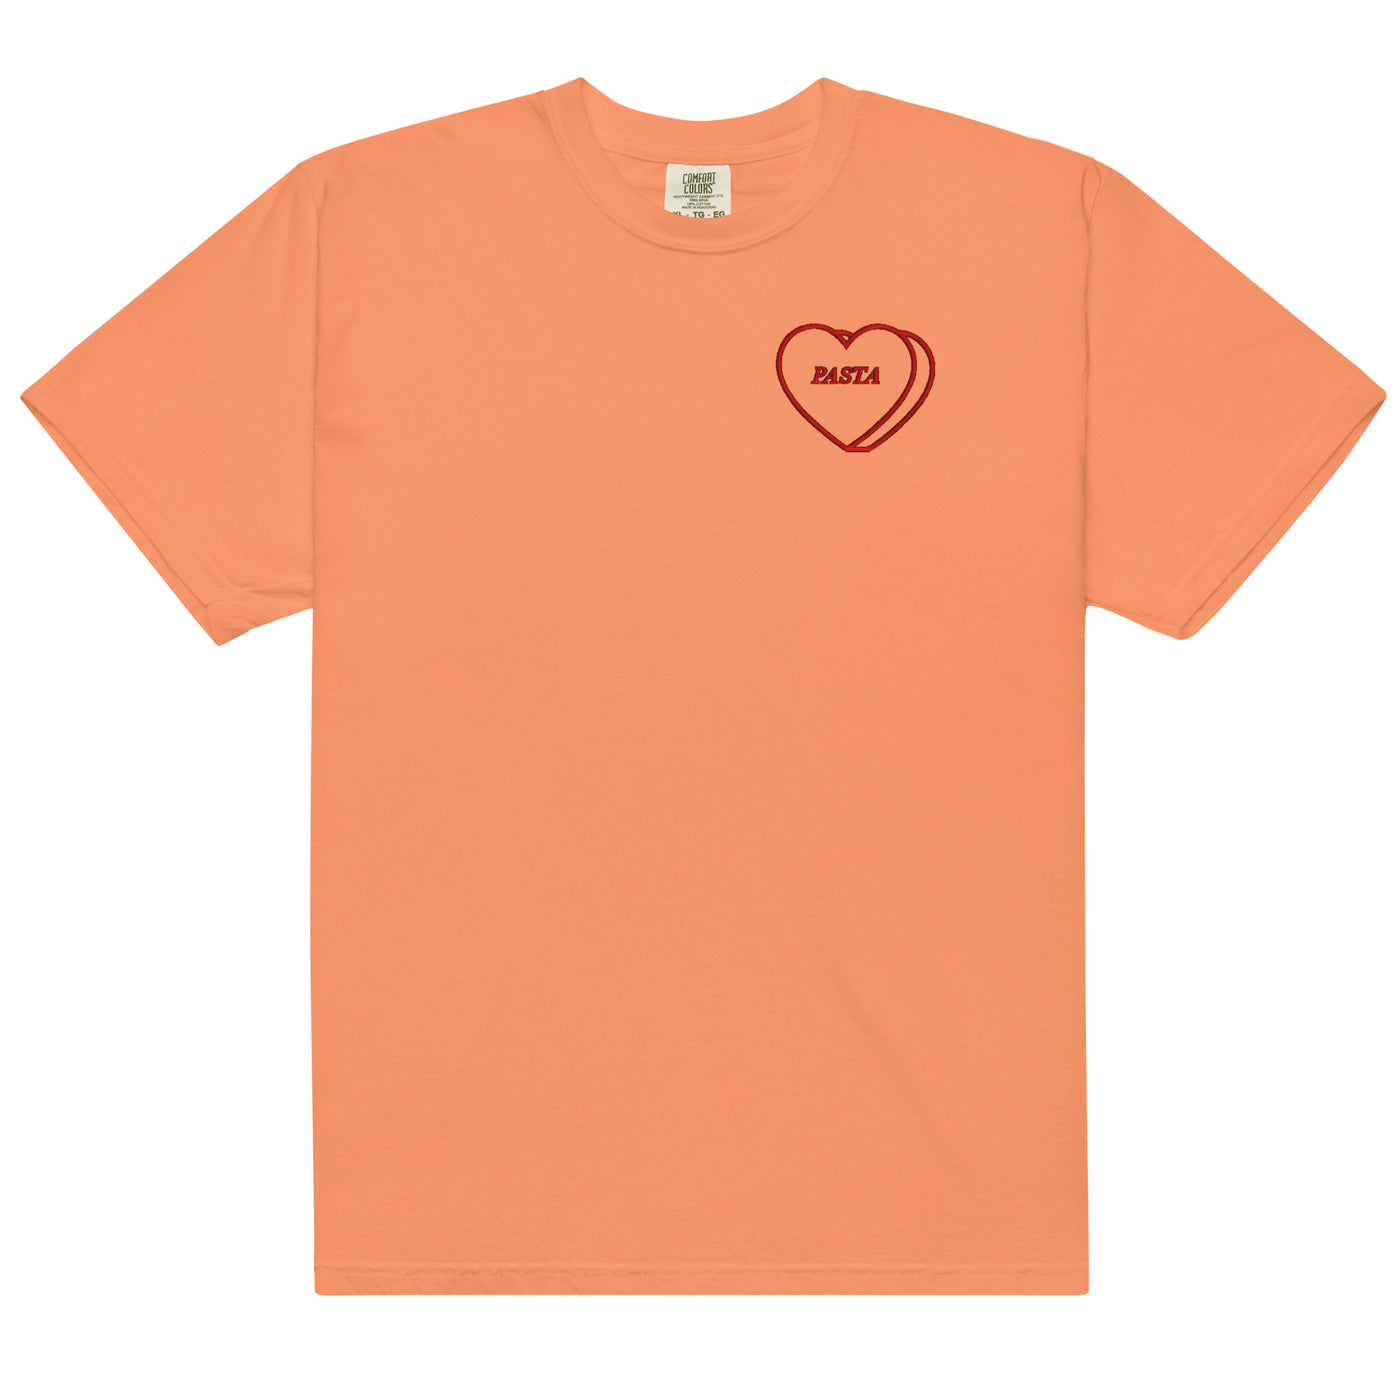 Make It Yours™ 'Candy Heart' Tee